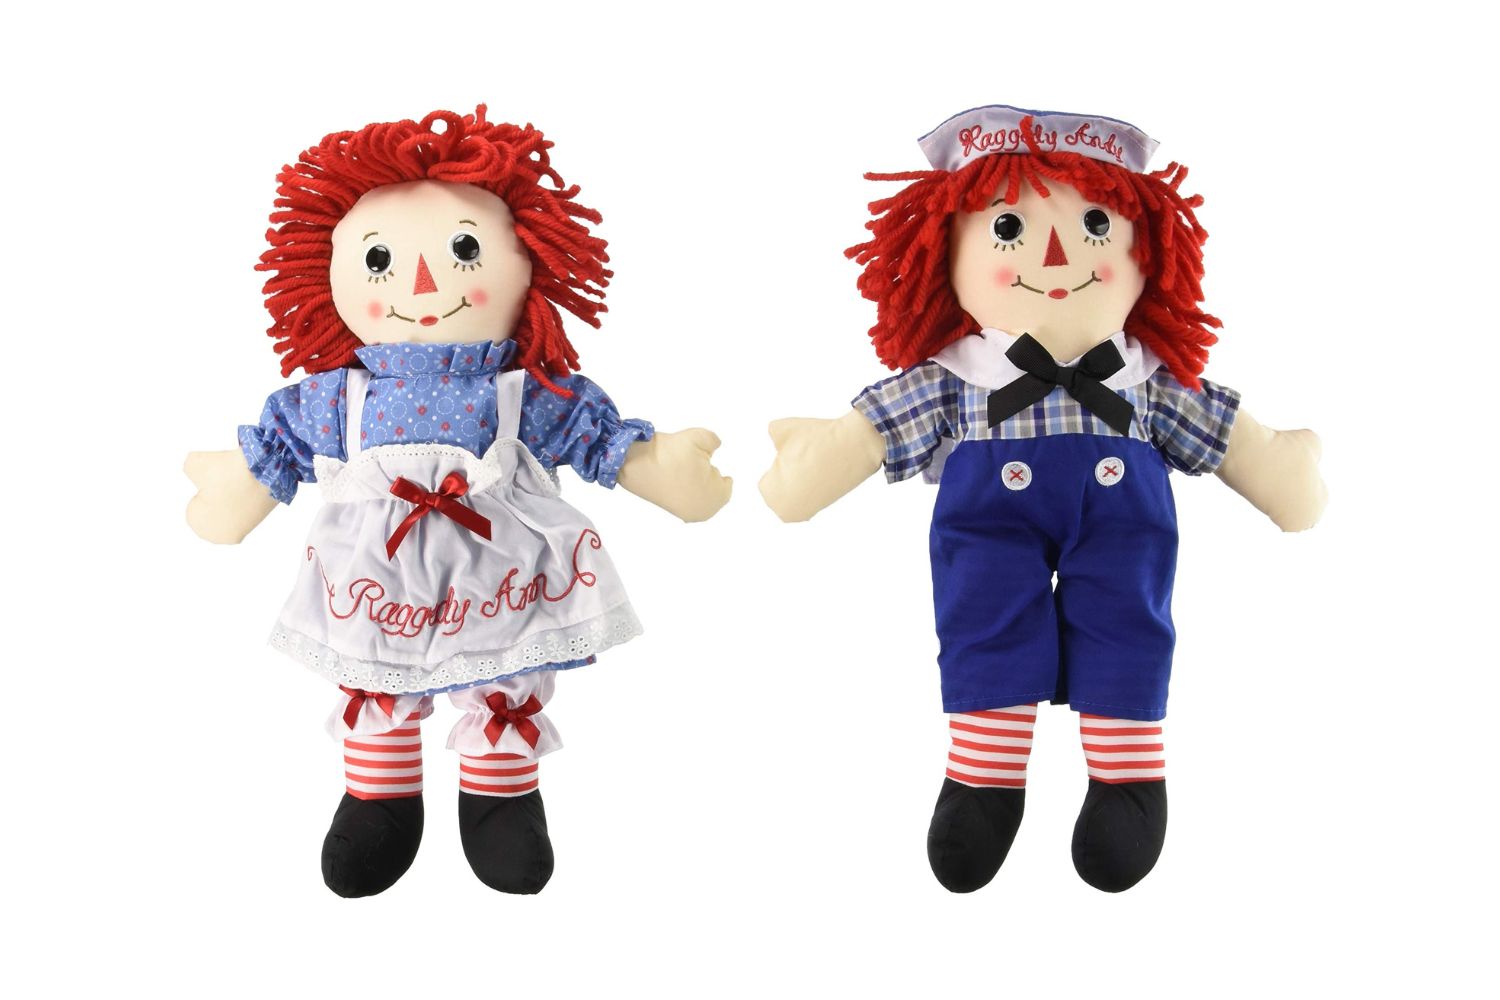 15-extraordinary-facts-about-raggedy-ann-doll